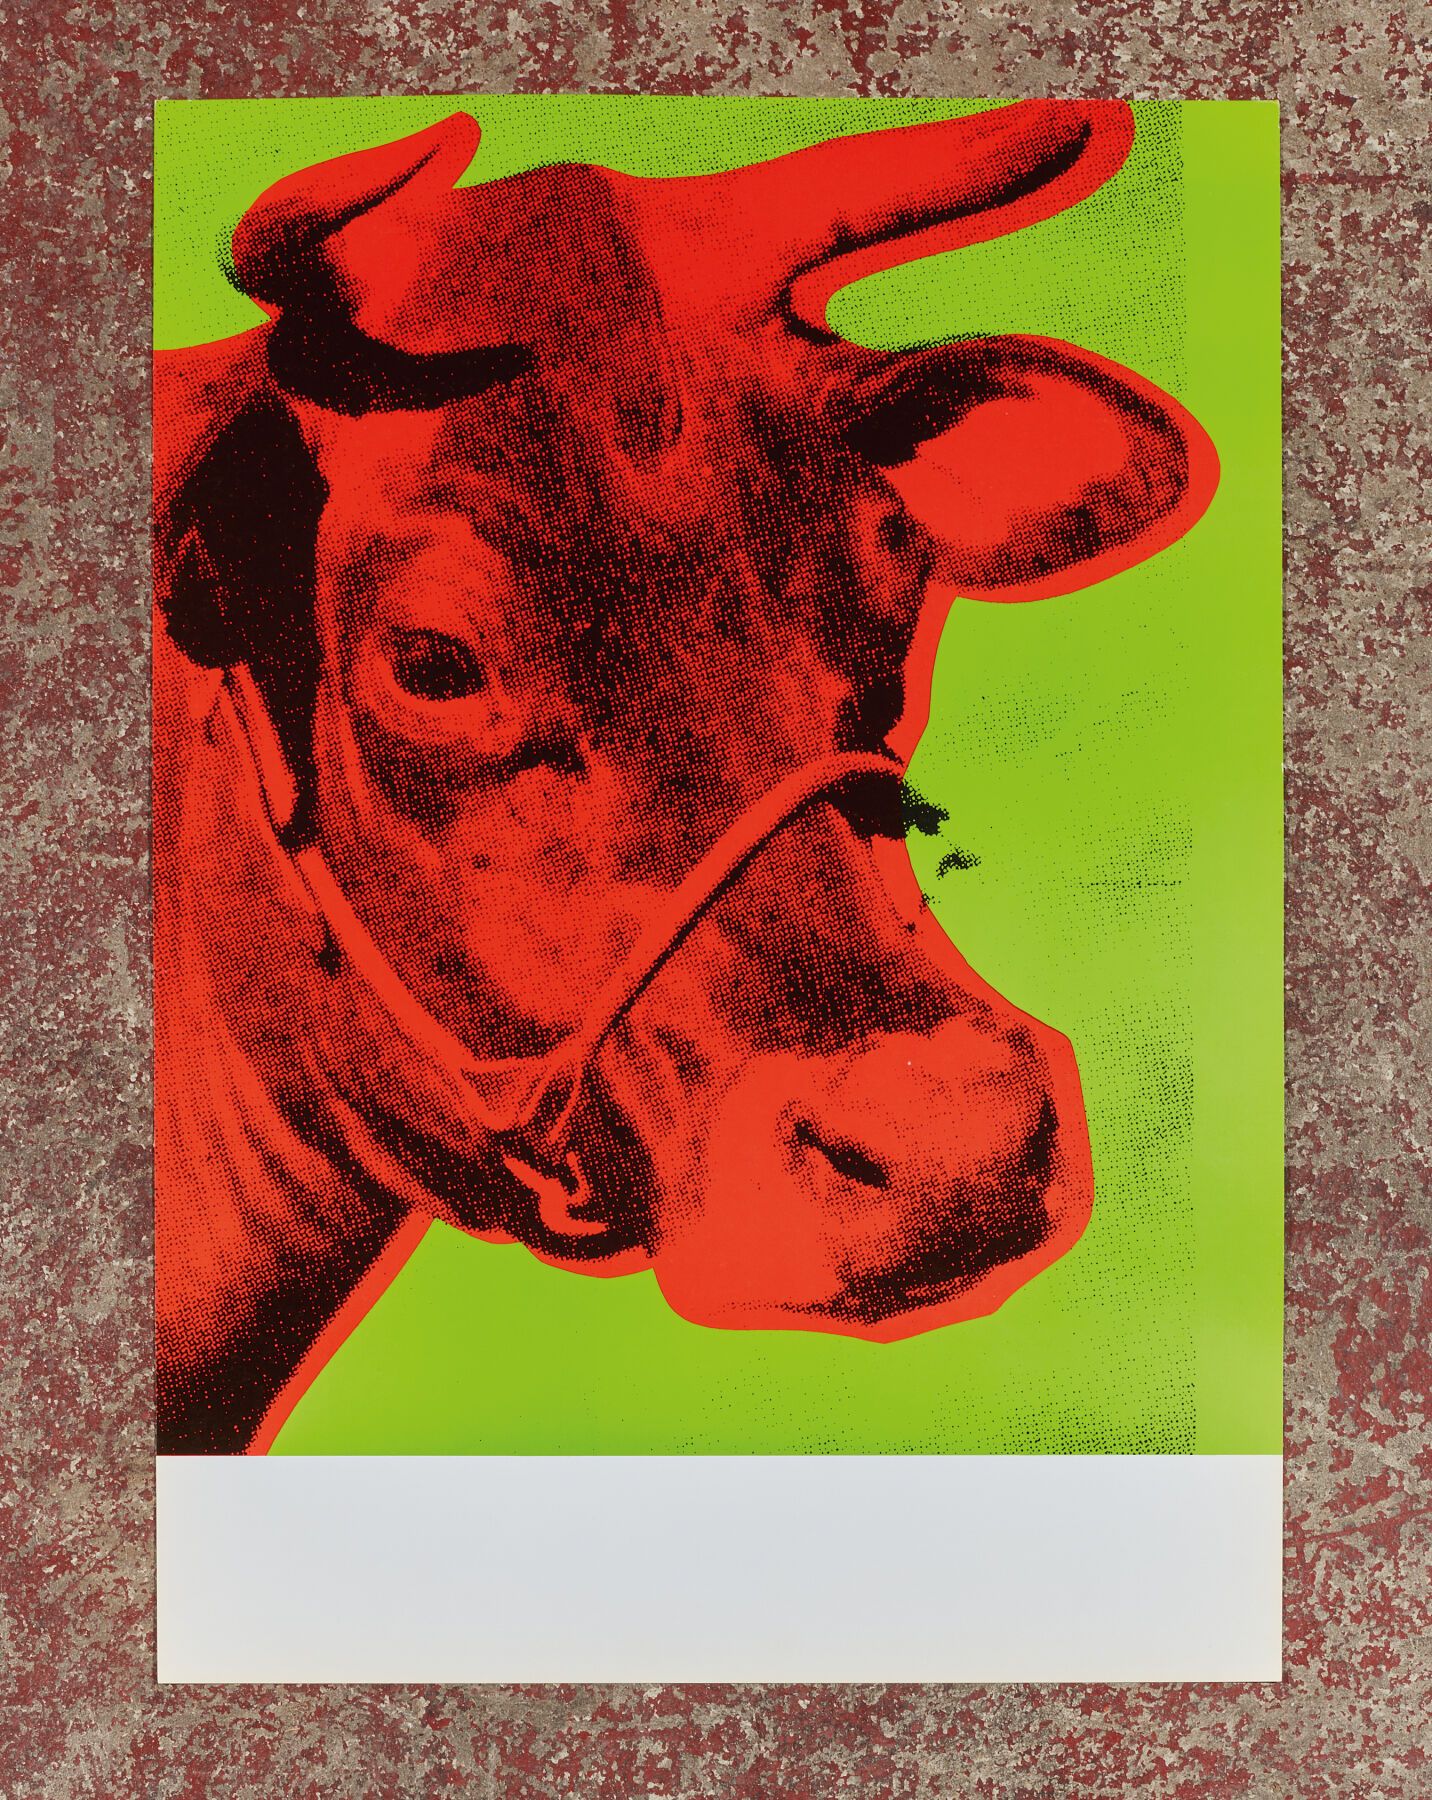 Null Andy WARHOL (after).
Red Cow - 1970.
Offset lithograph on paper.
Poster bef&hellip;